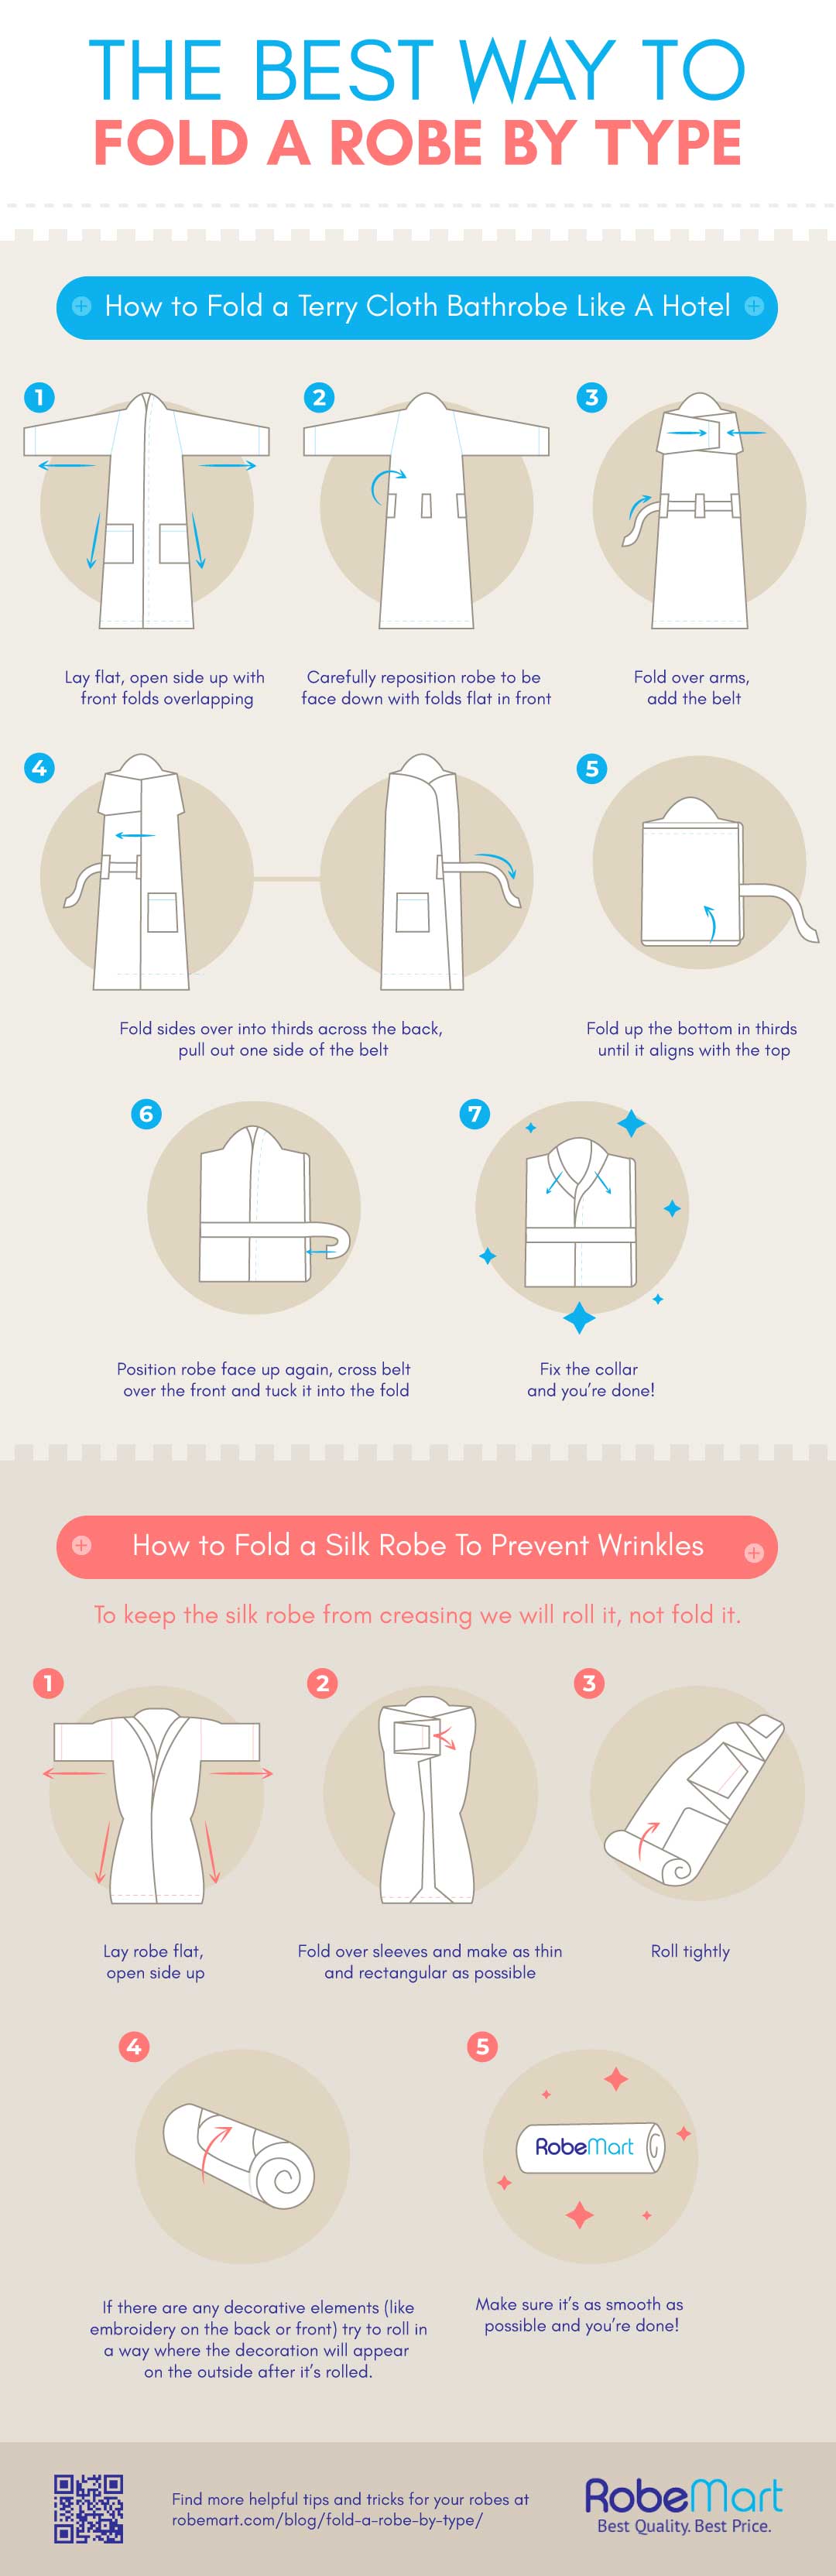 Best Way To Fold A Robe By Type: Bathrobe, Terry Cloth, Silk, Bridesmaid [INFOGRAPHIC] | https://robemart.com/blog/fold-a-robe-by-type/